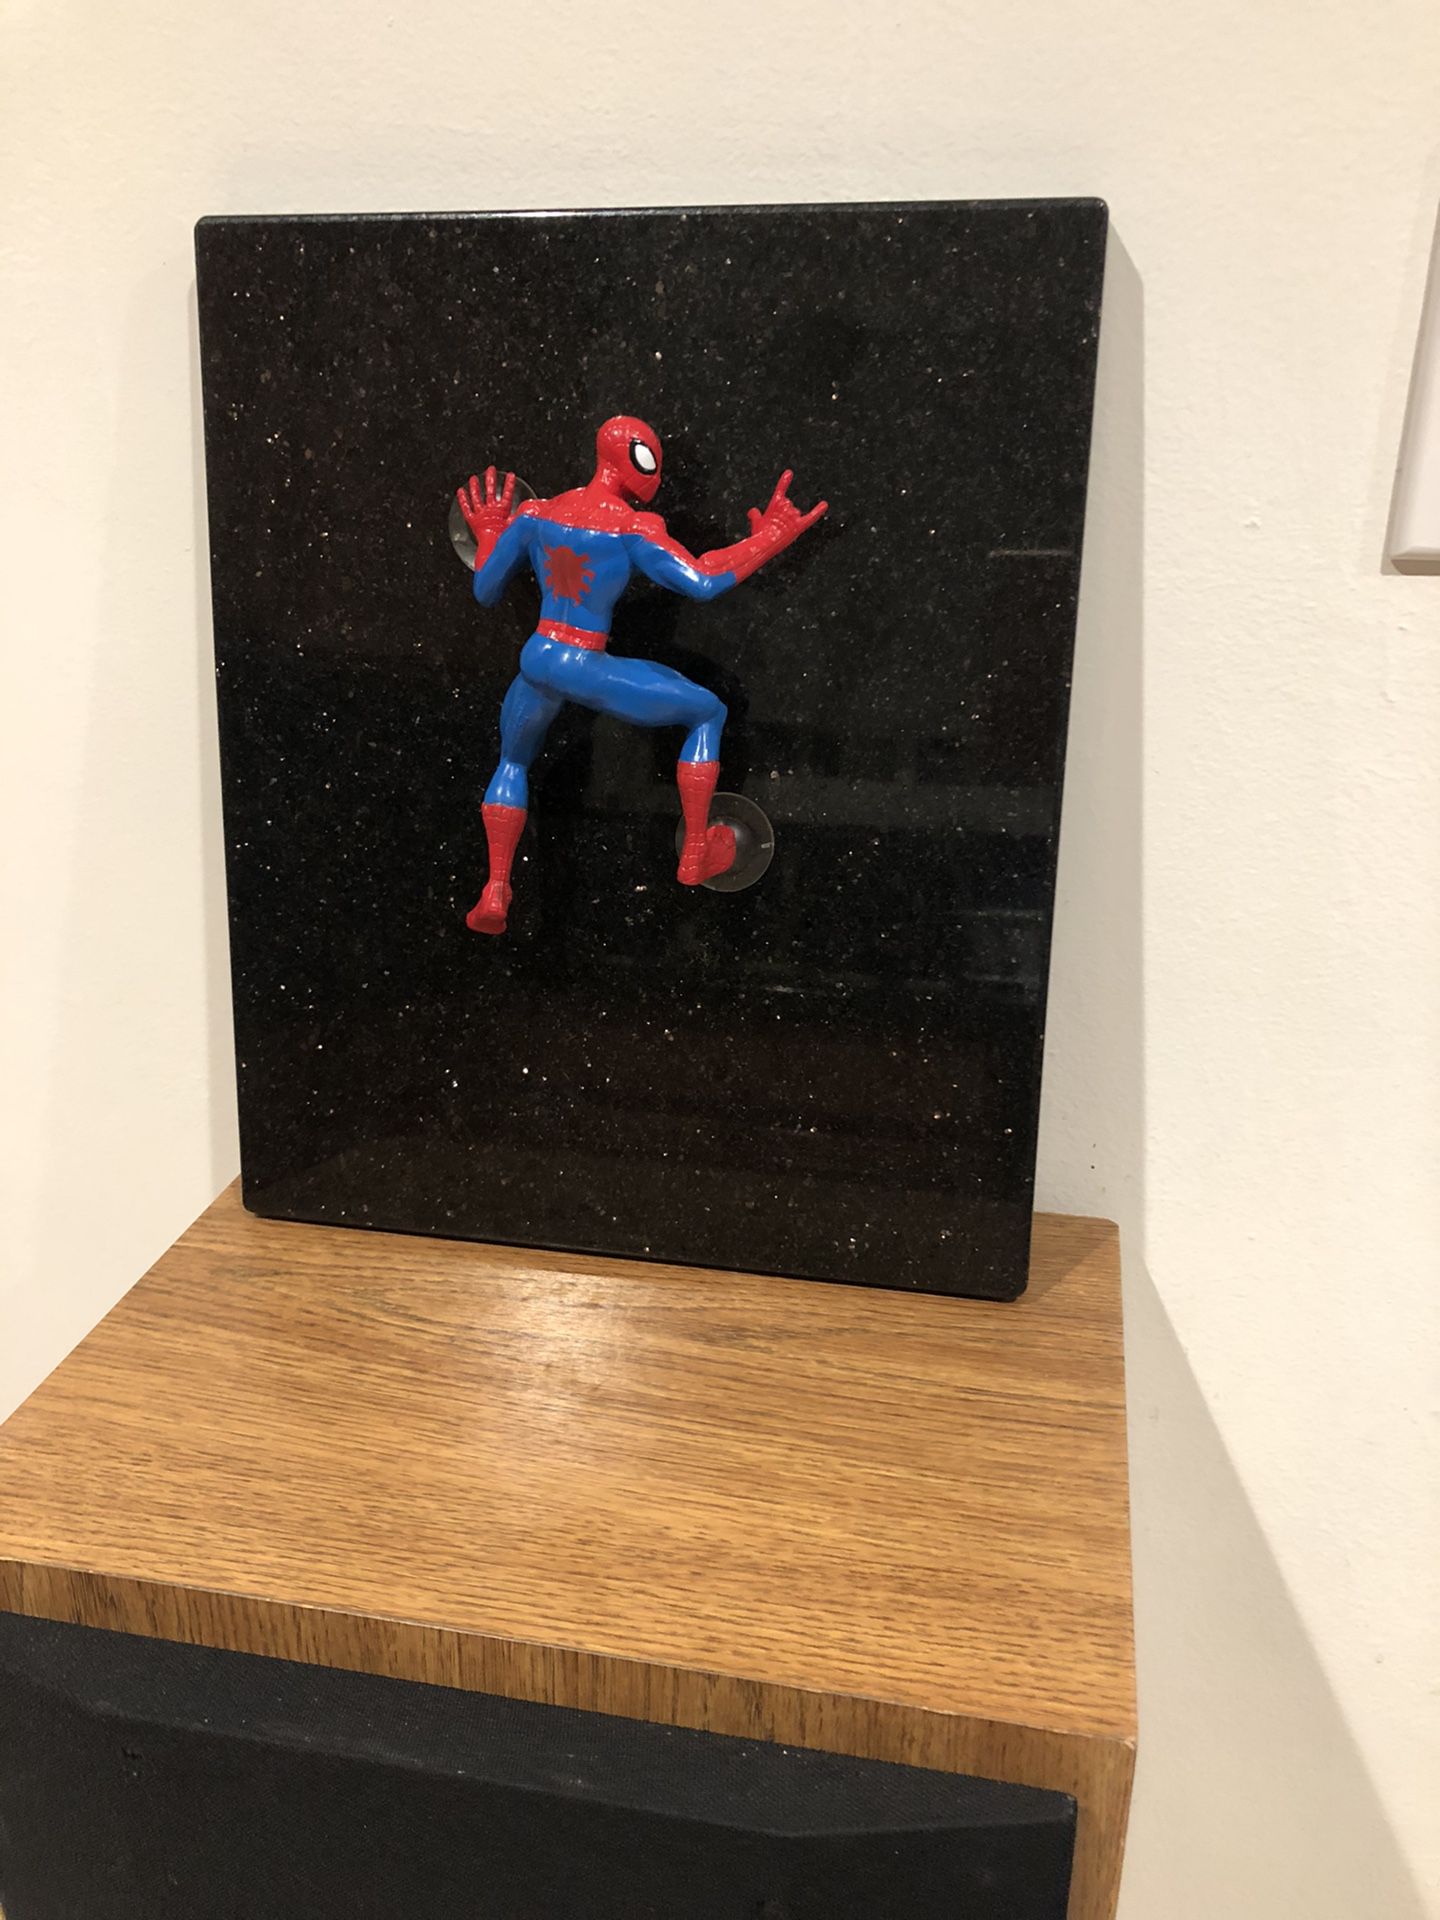 SPIDER-MAN ACTION FIGURE WITH SUCTION CUPS